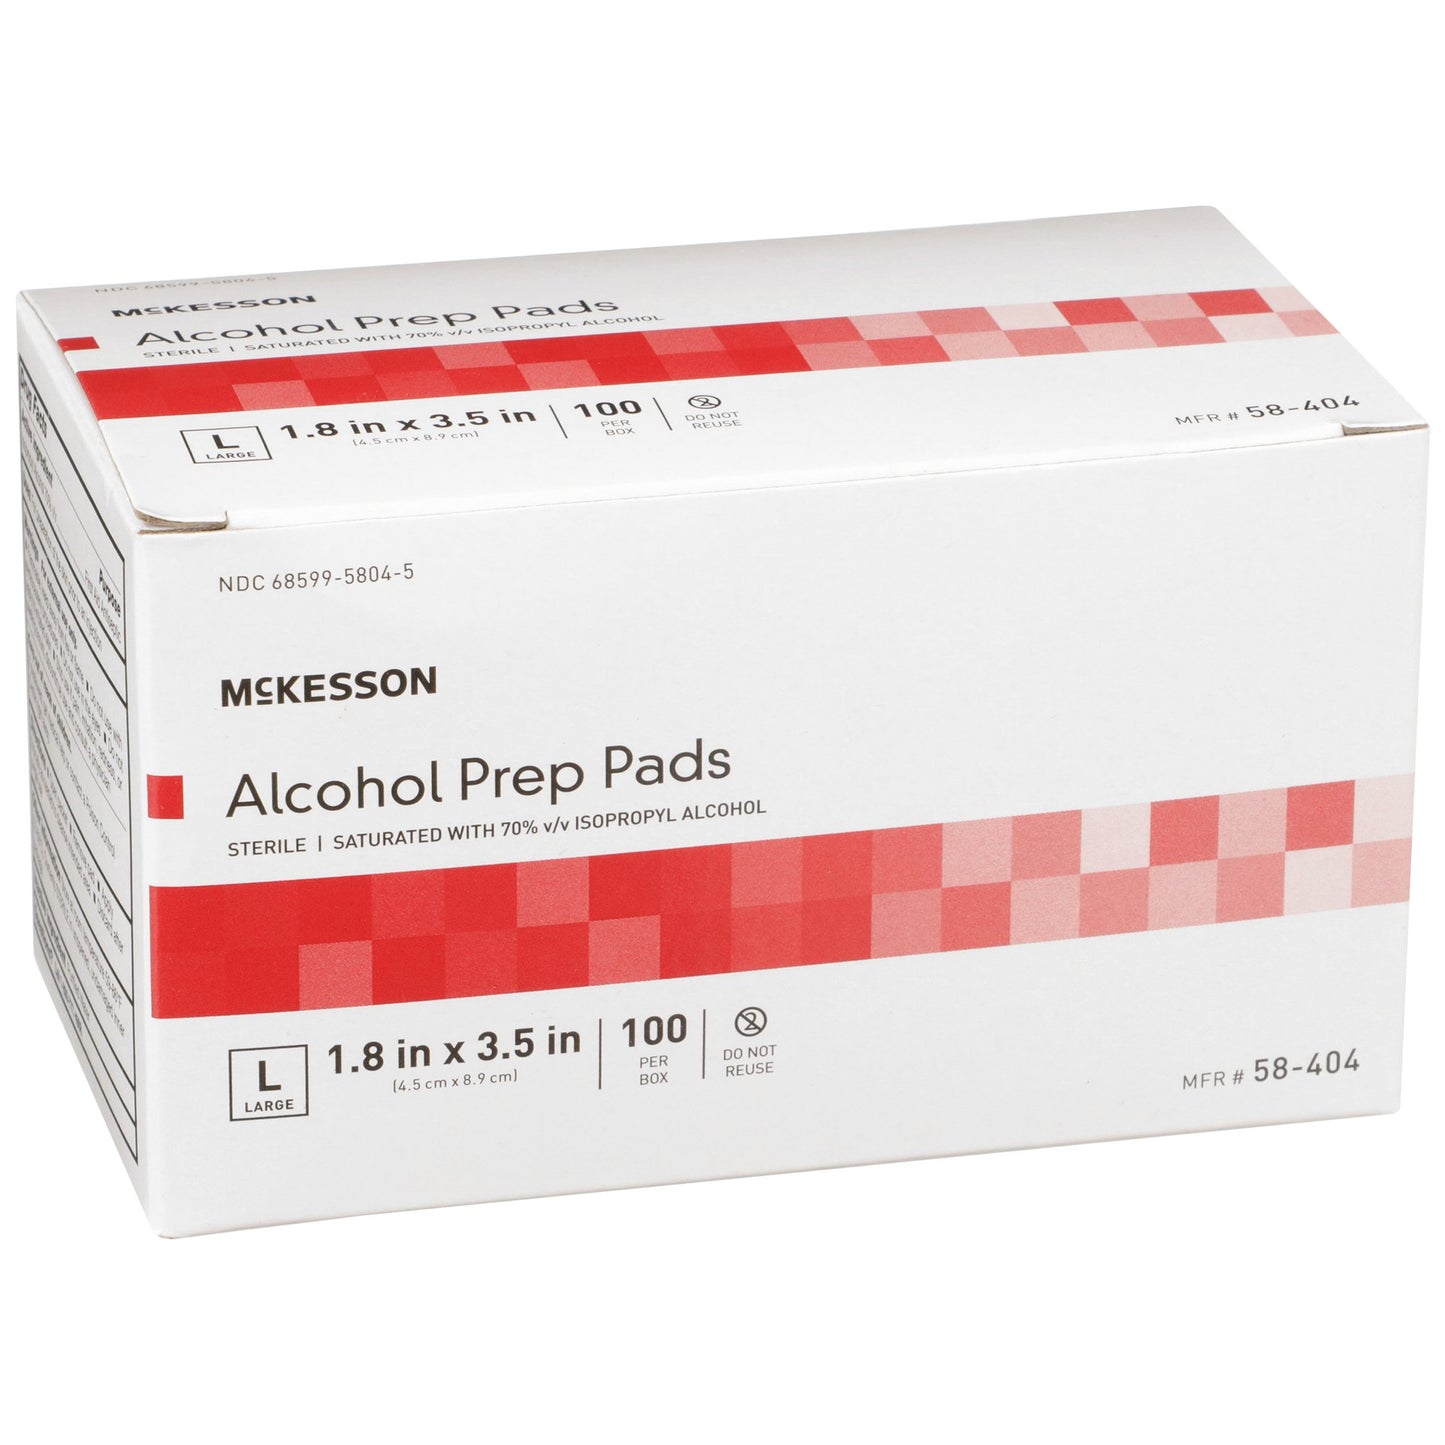 Alcohol Prep Pad McKesson 70% Strength Isopropyl Alcohol Individual Packet Large Sterile, 100 ct